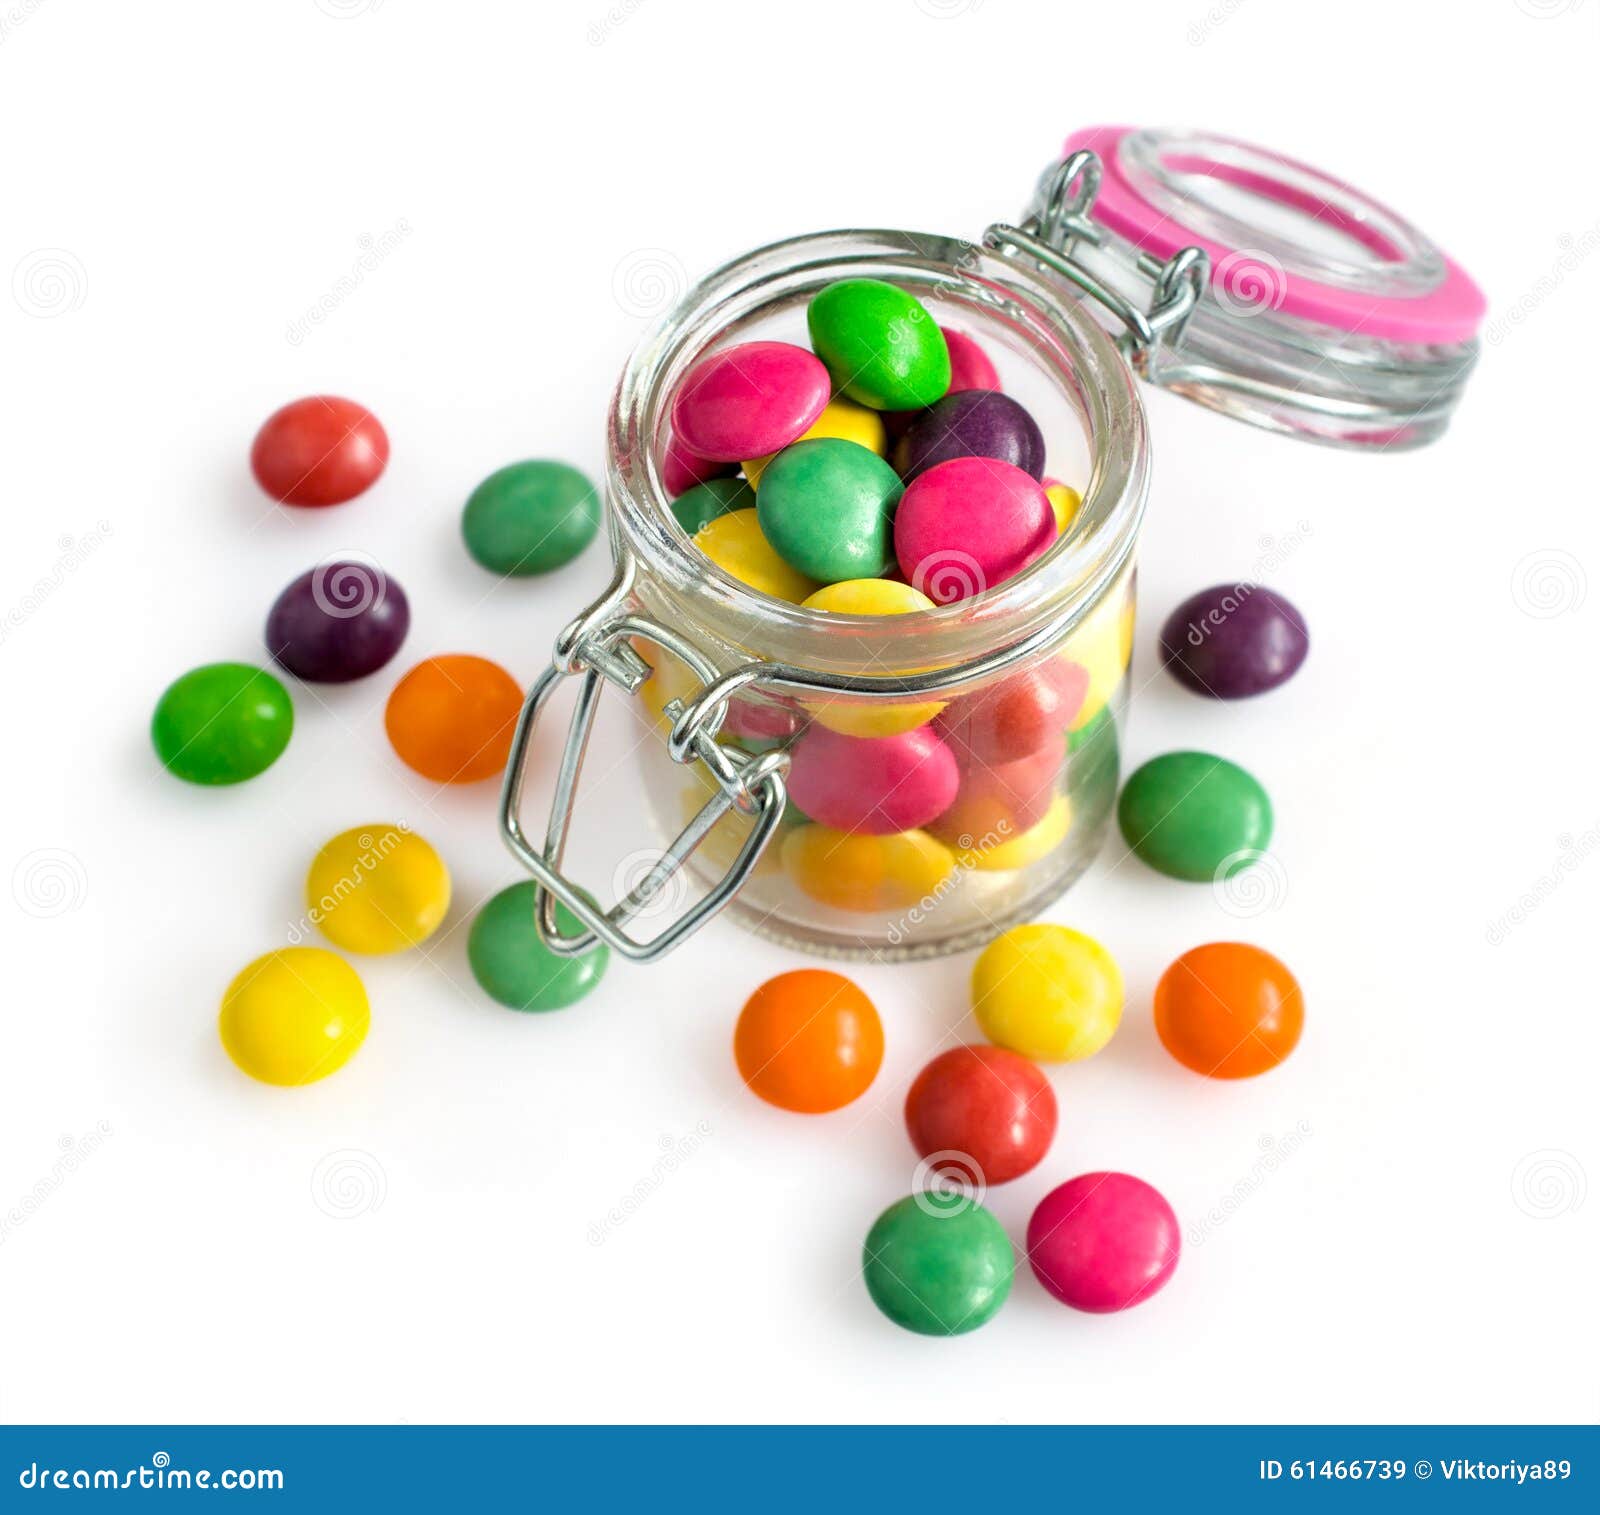 Colorful candy drops stock image. Image of child, circle - 61466739